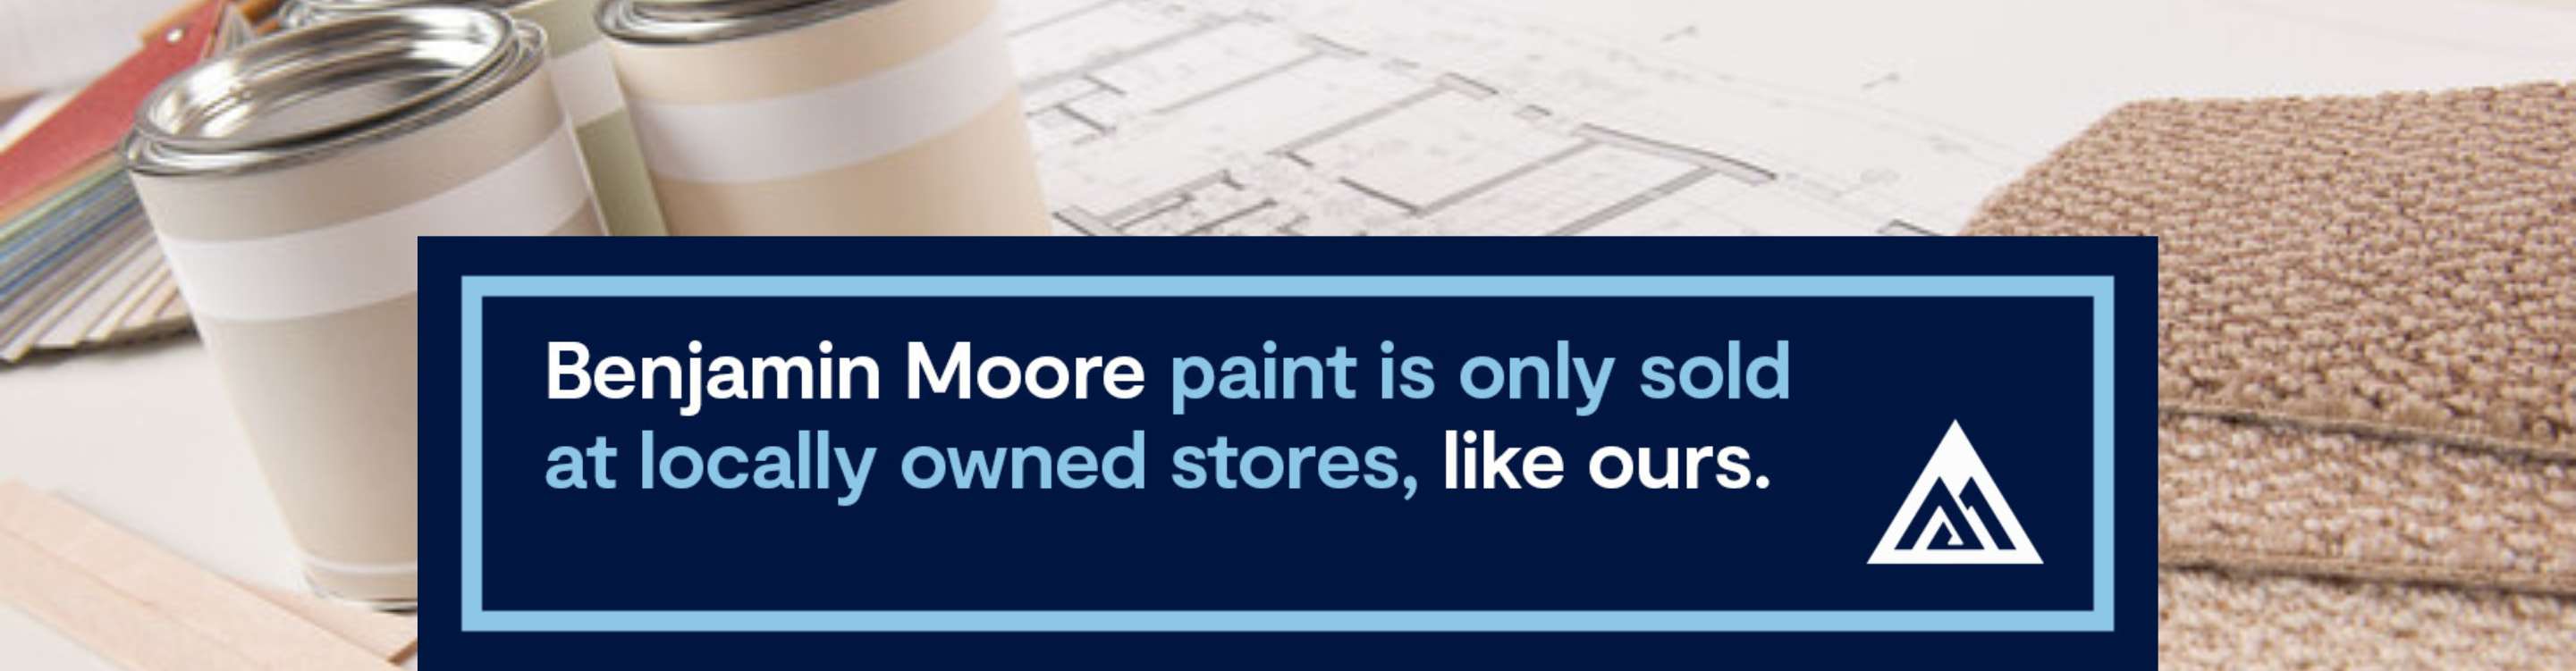 paint cans and swatches on home design plans